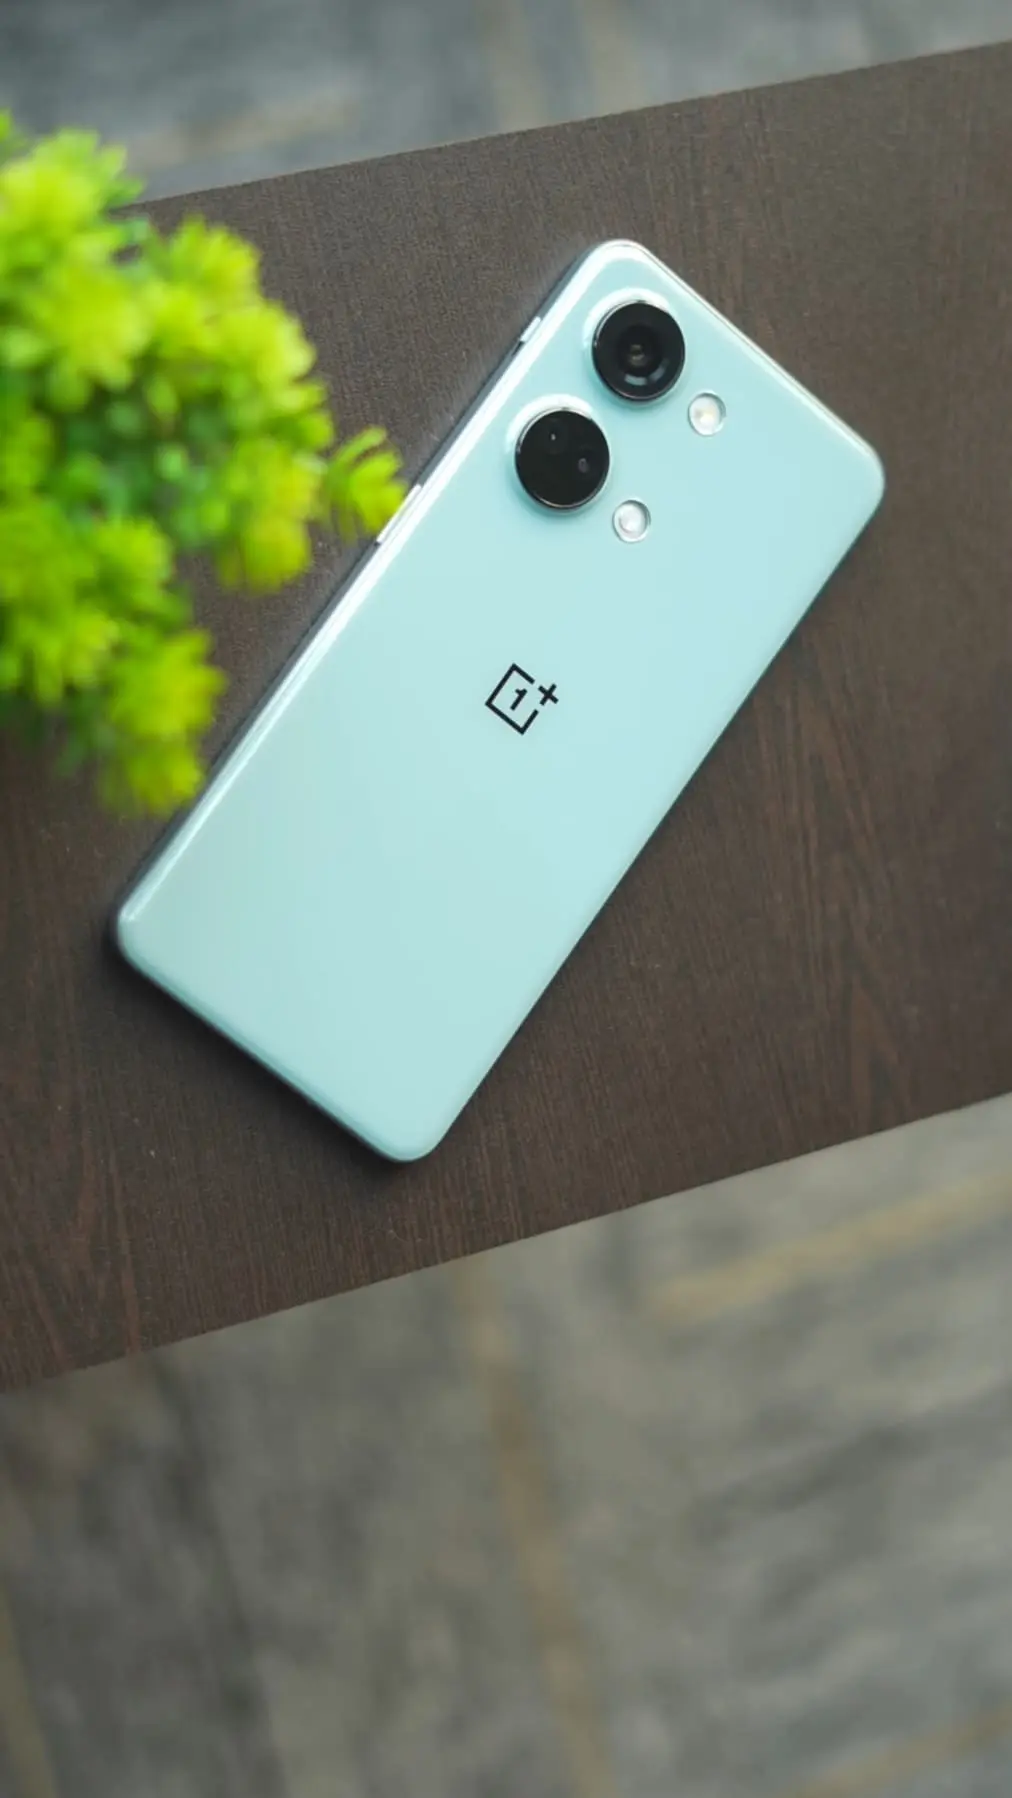 OnePlus Nord 3 With Dimensity 9000 SoC, Alert Slider Launched in India:  Price, Specifications